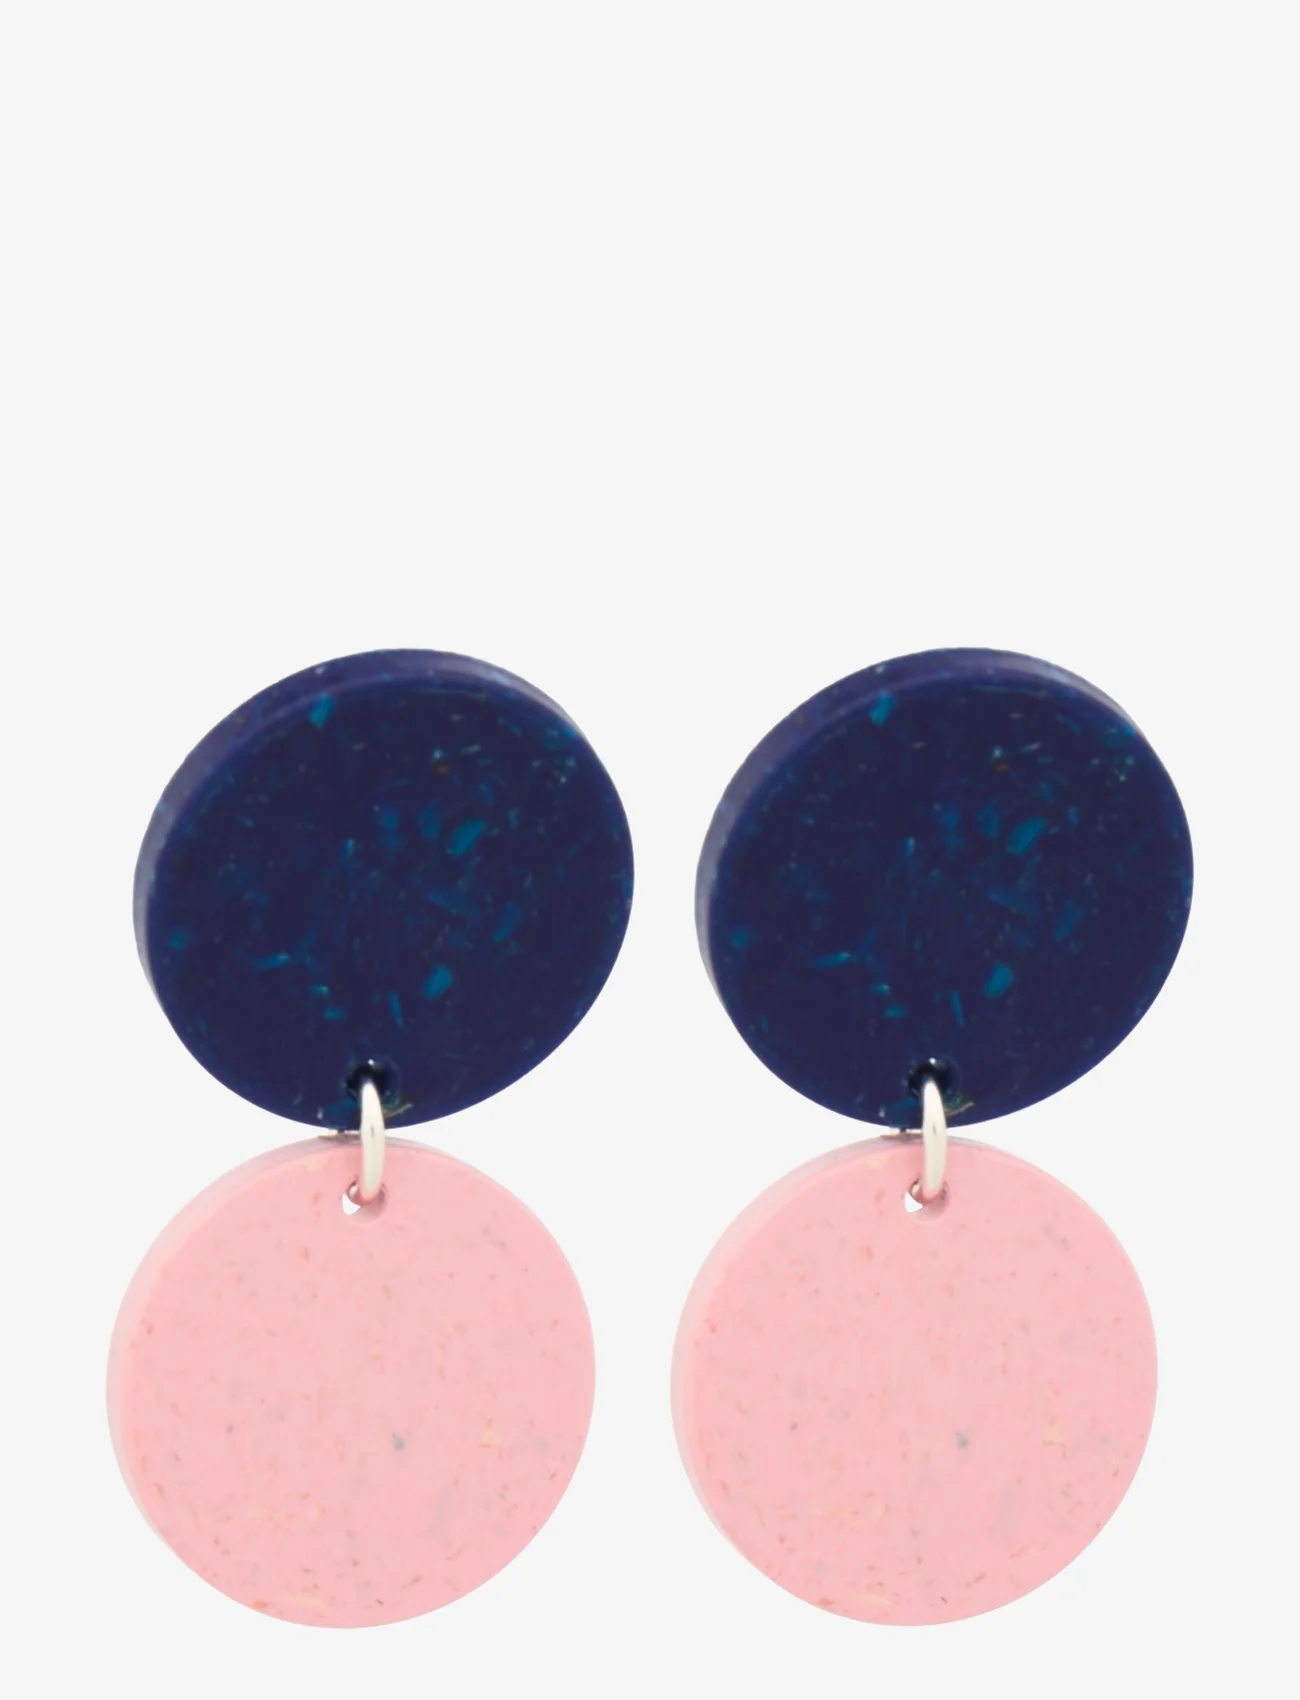 Papu - DOTS EARRINGS No.2, Sweet Blueberry/Cherry Blossom - oorhangers - multicolor - 0